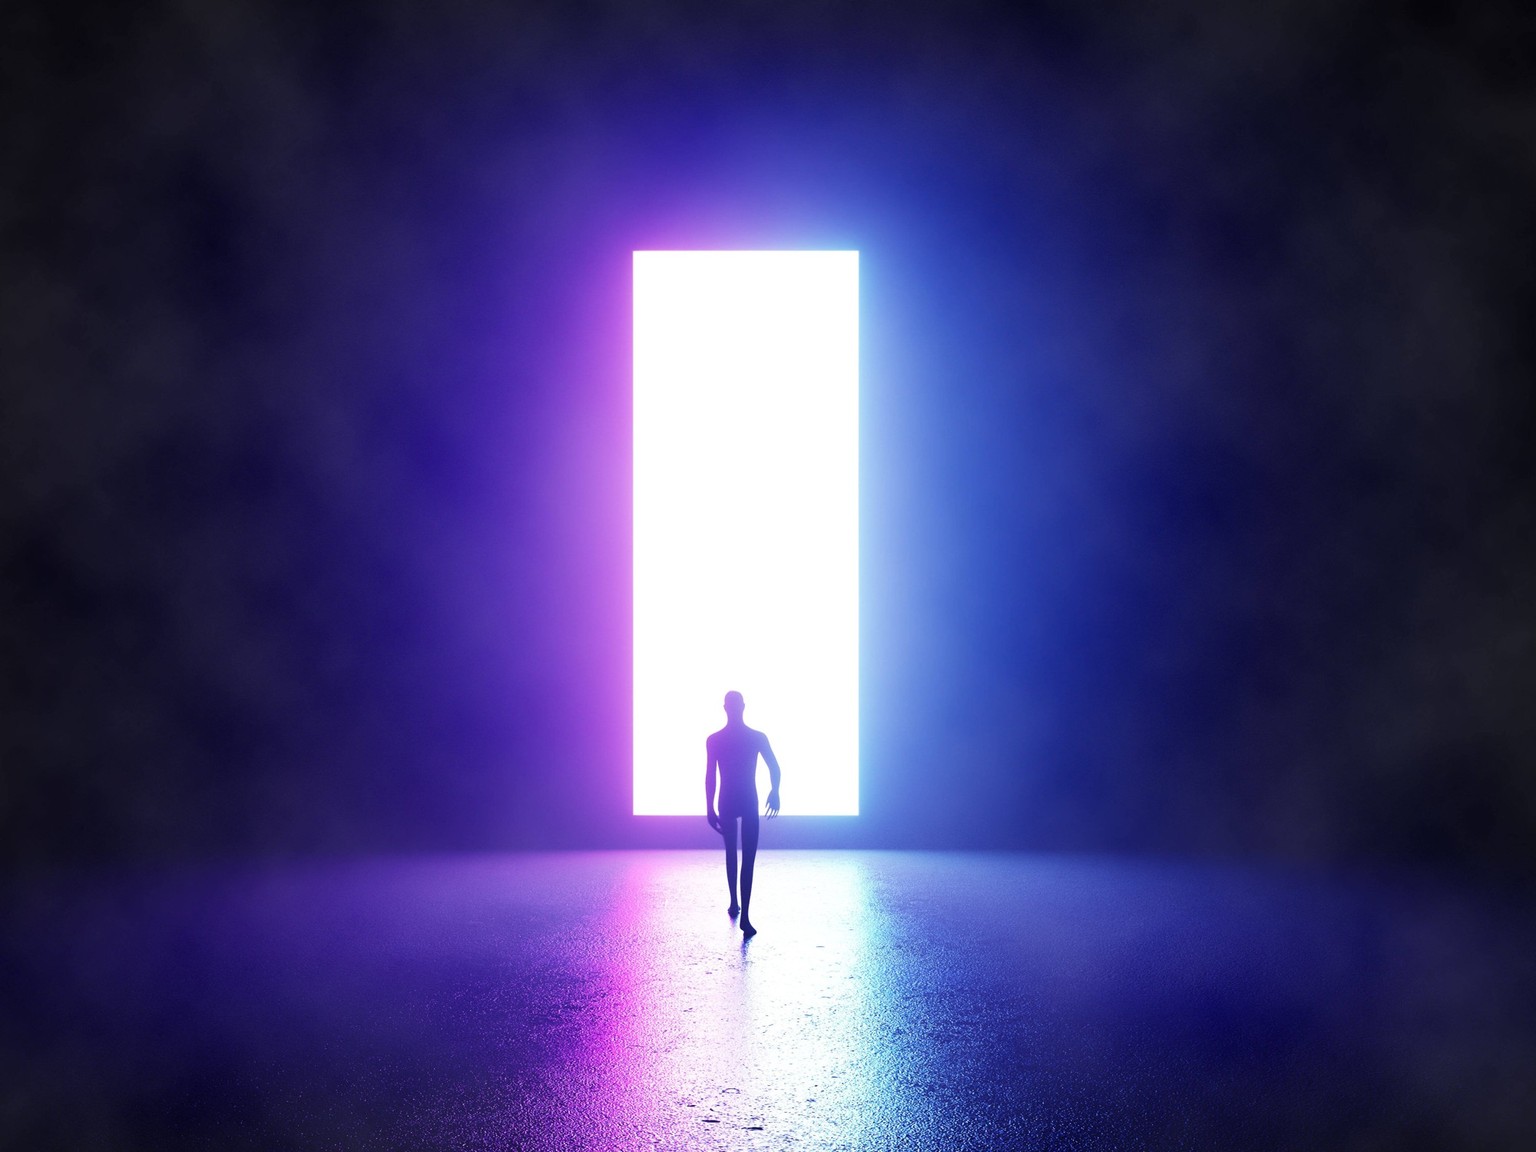 White light Silhouette of a naked man viewed from behind in a large dark room, walking towards a purple luminescent rectangular opening PUBLICATIONxNOTxINxFRA Copyright: xDR/Andia.frx 388322